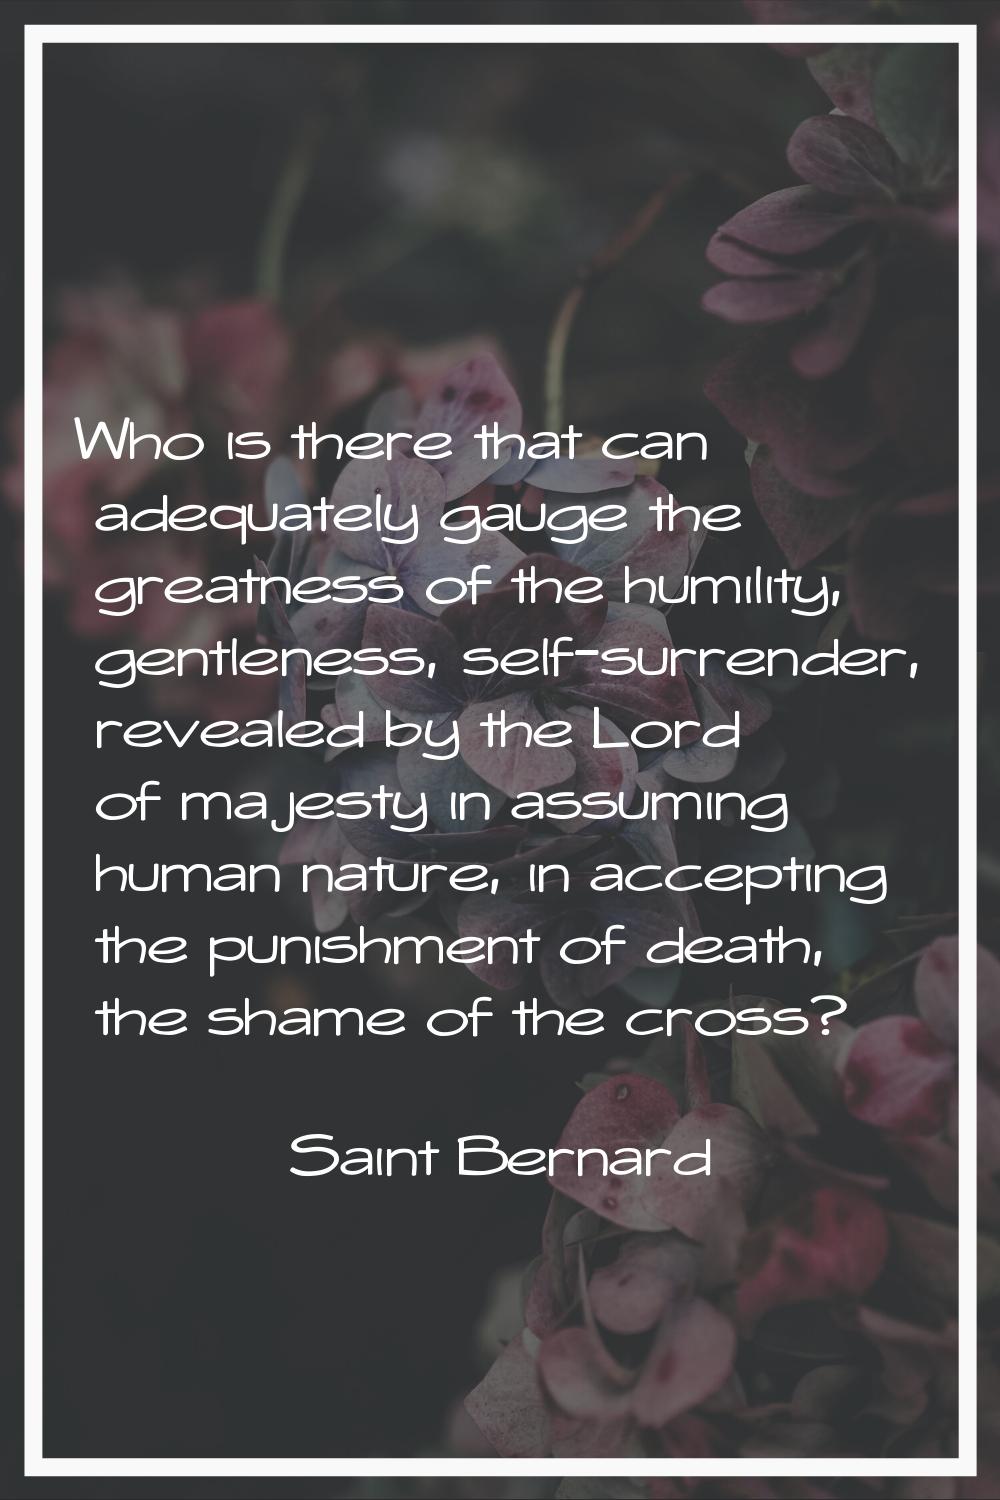 Who is there that can adequately gauge the greatness of the humility, gentleness, self-surrender, r